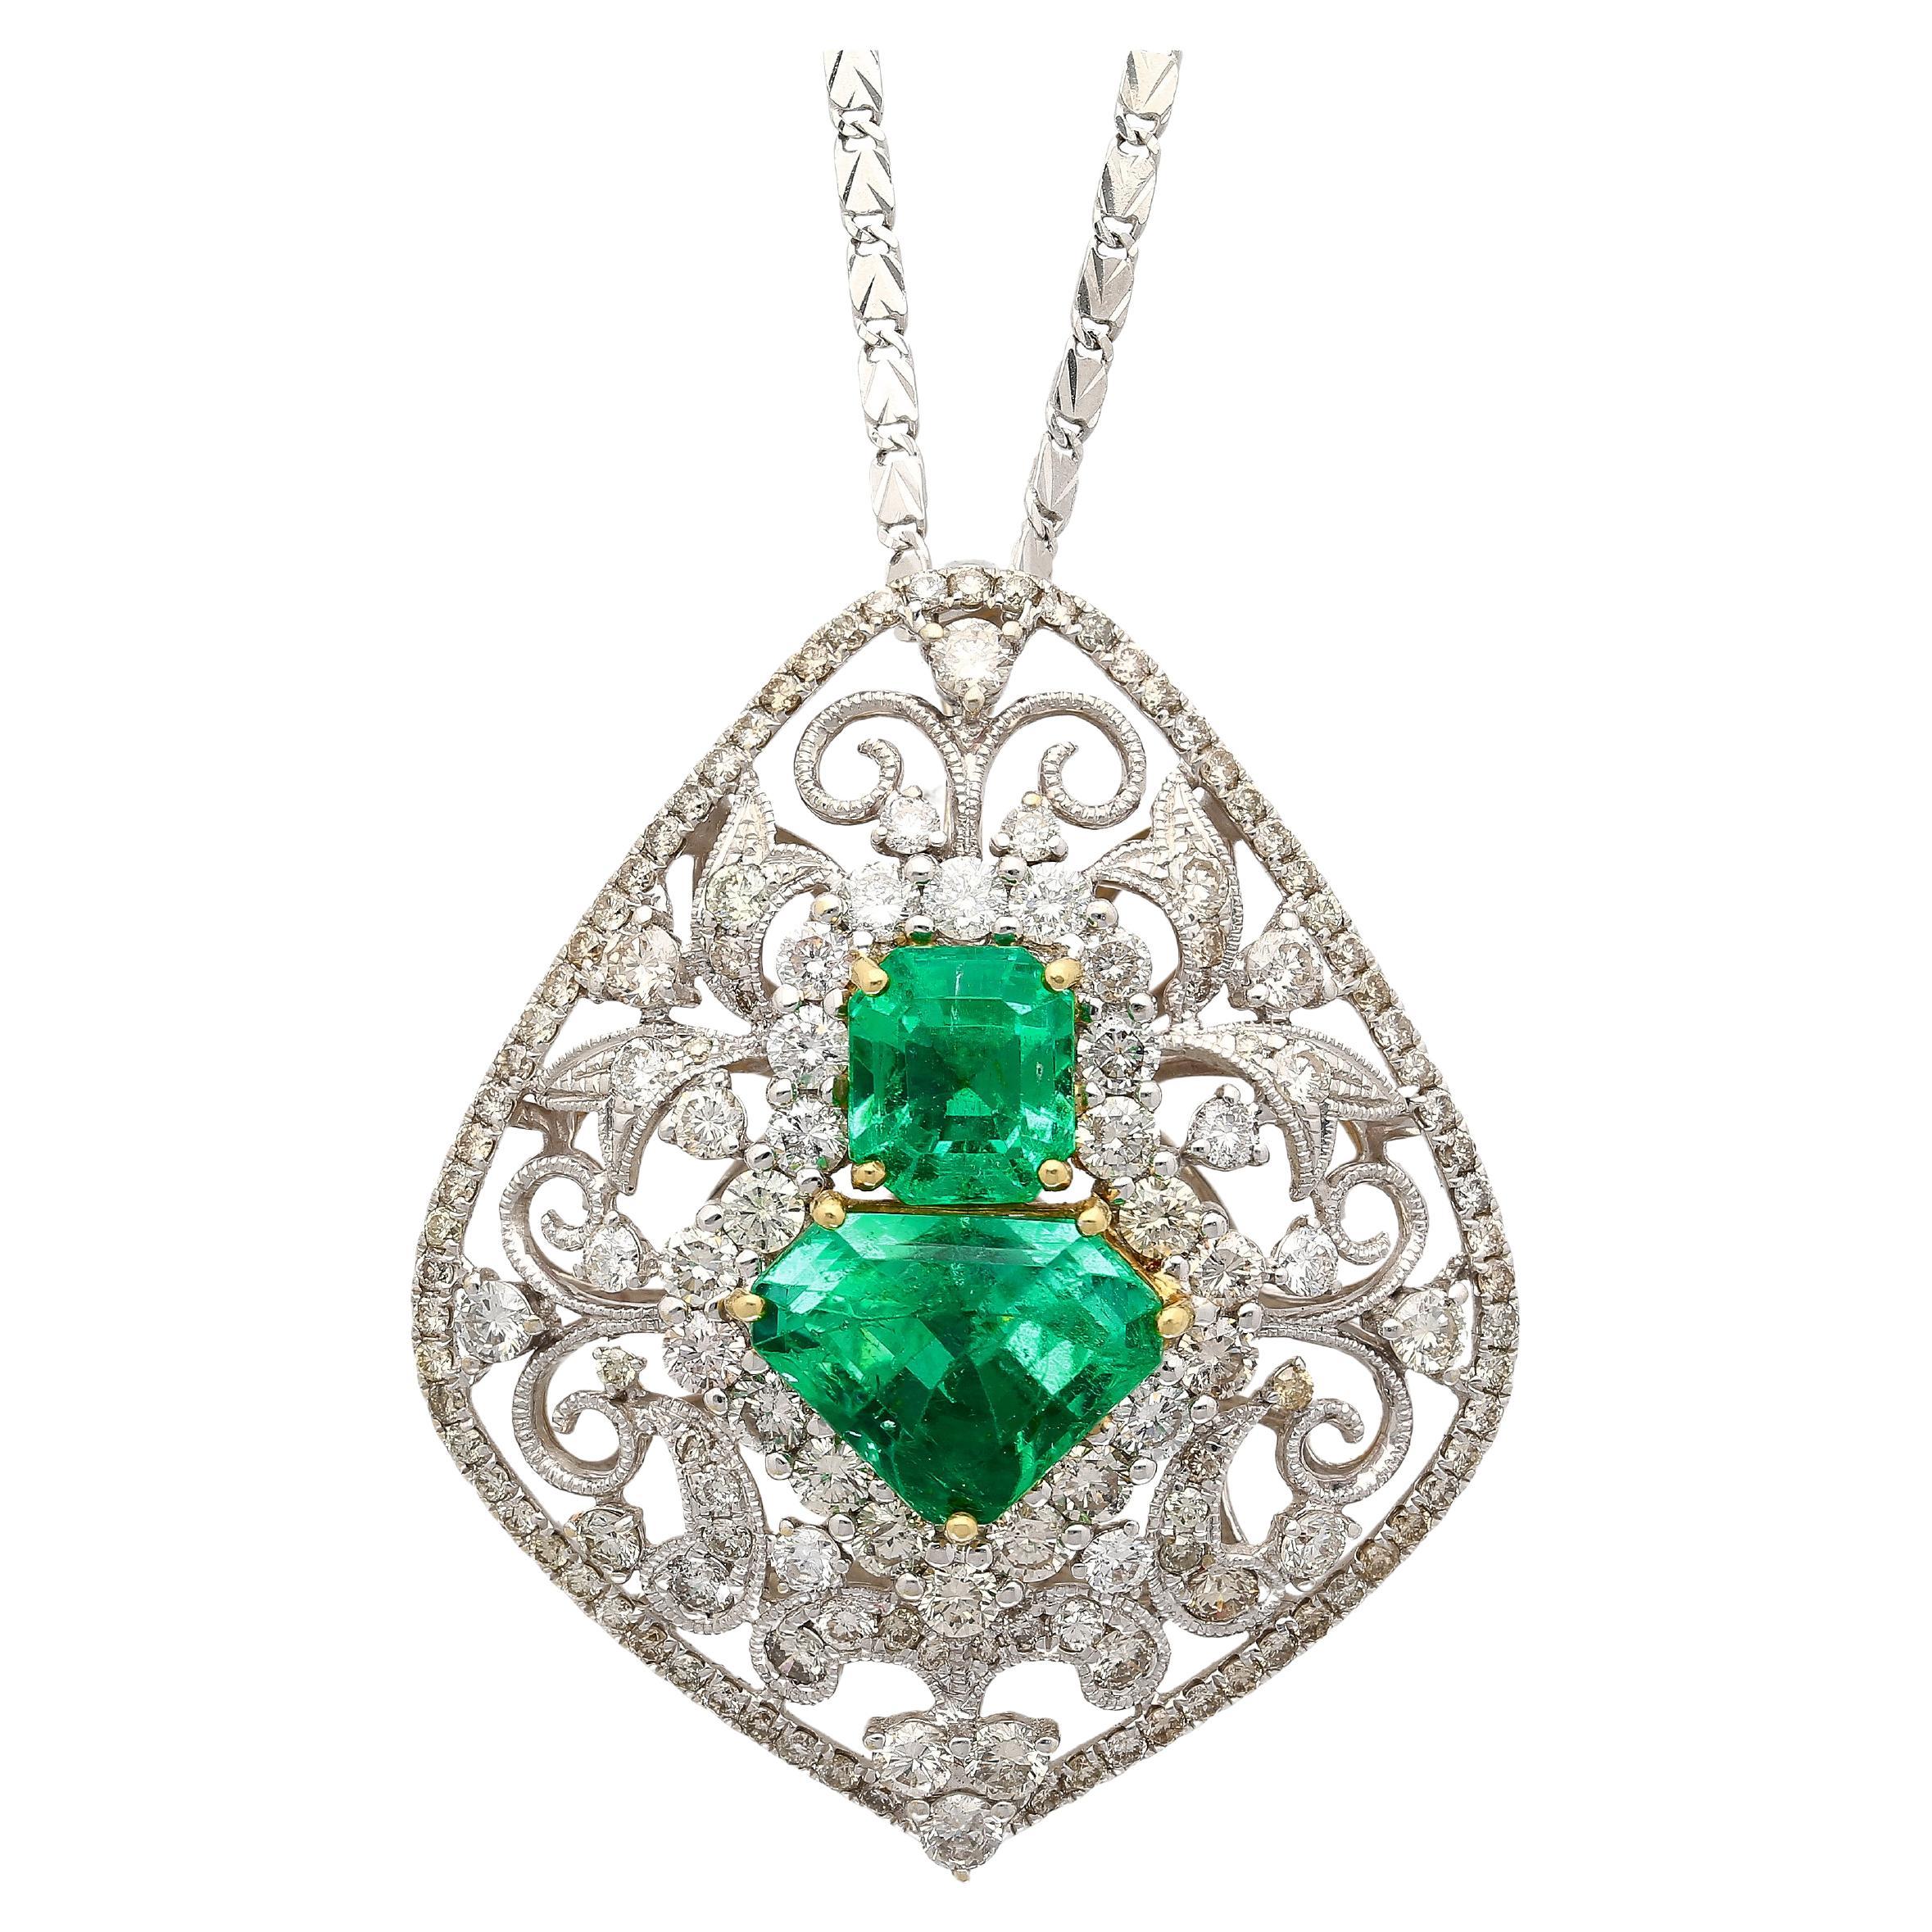 Vintage Carved 18K White Gold Pendant Necklace With Shield Cut Emeralds